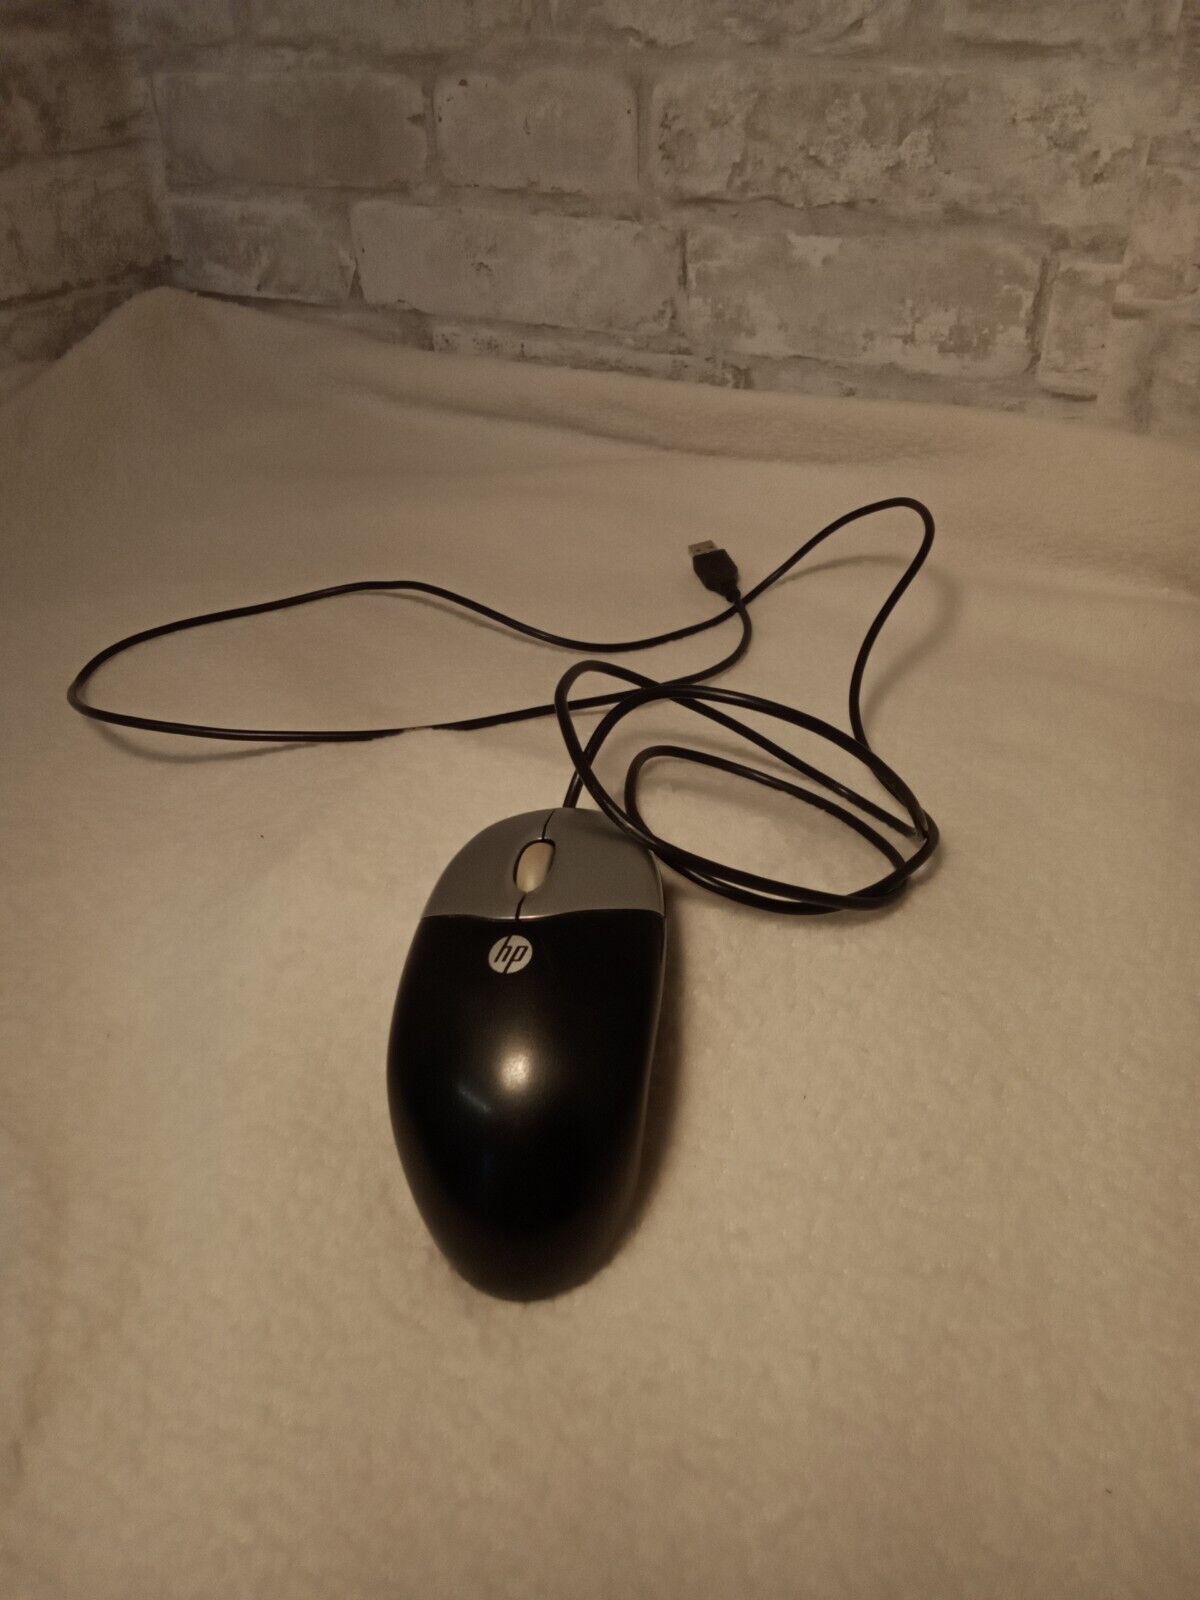 Vintage Corded mouse hp 295986-011 Optical Mouse USIP works great